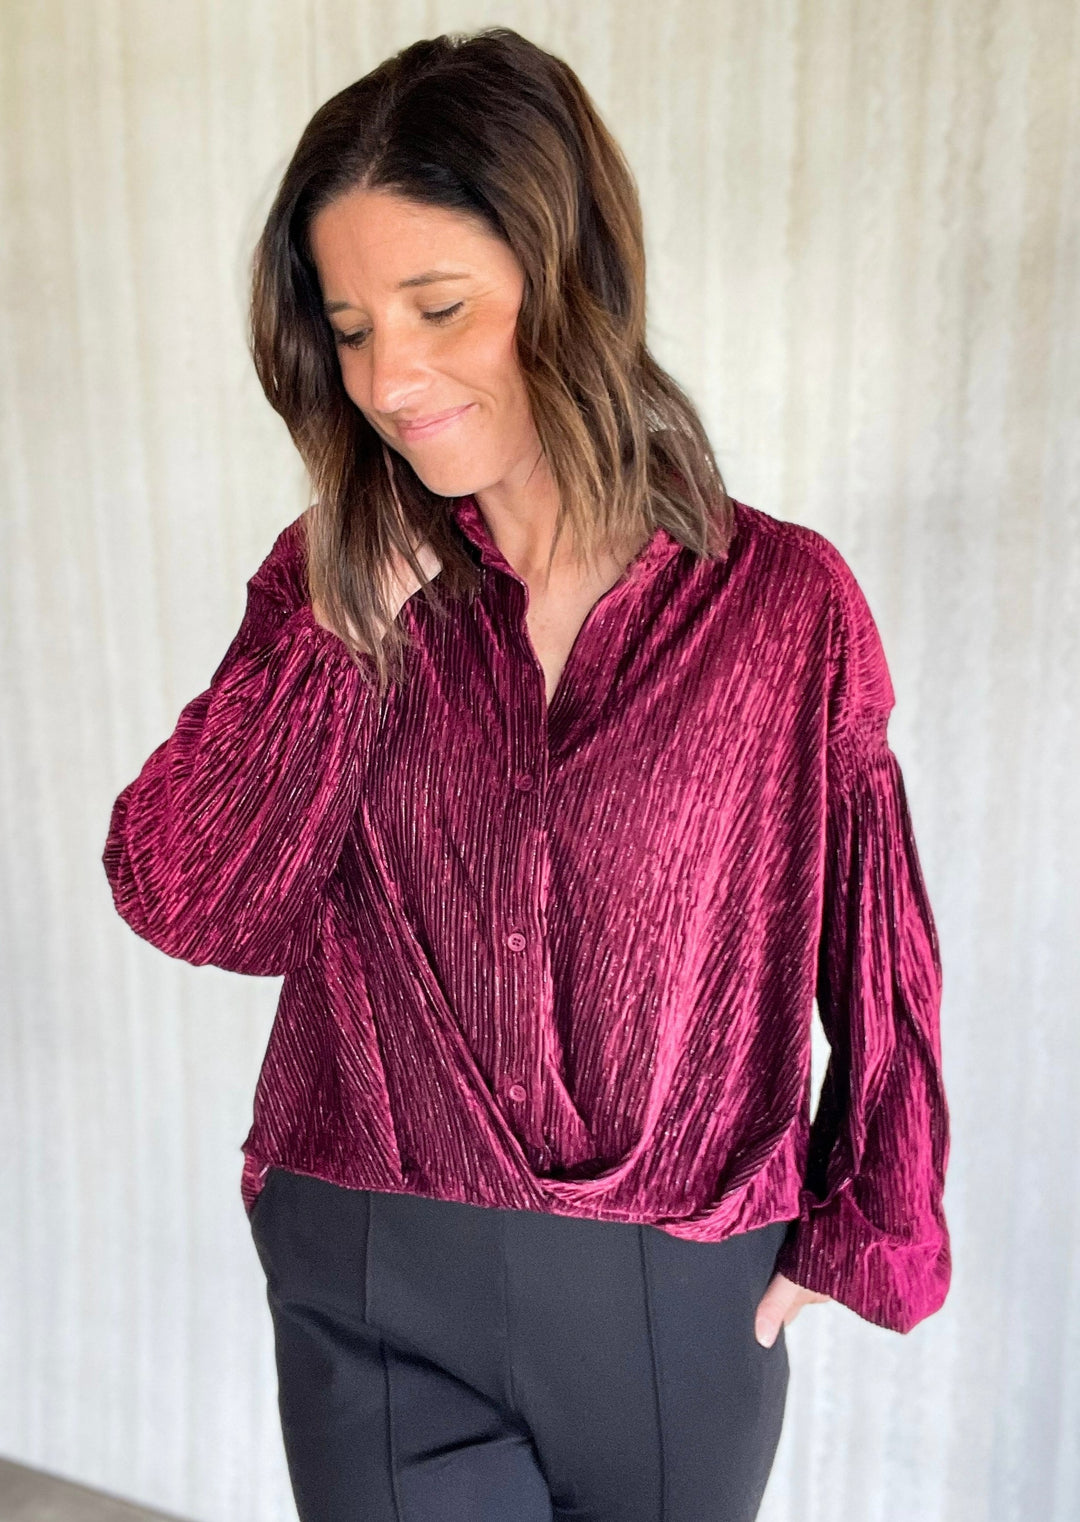 Holiday blouses - Burgundy Velvet Button Down Shirt (Office Holiday Party Outfit)